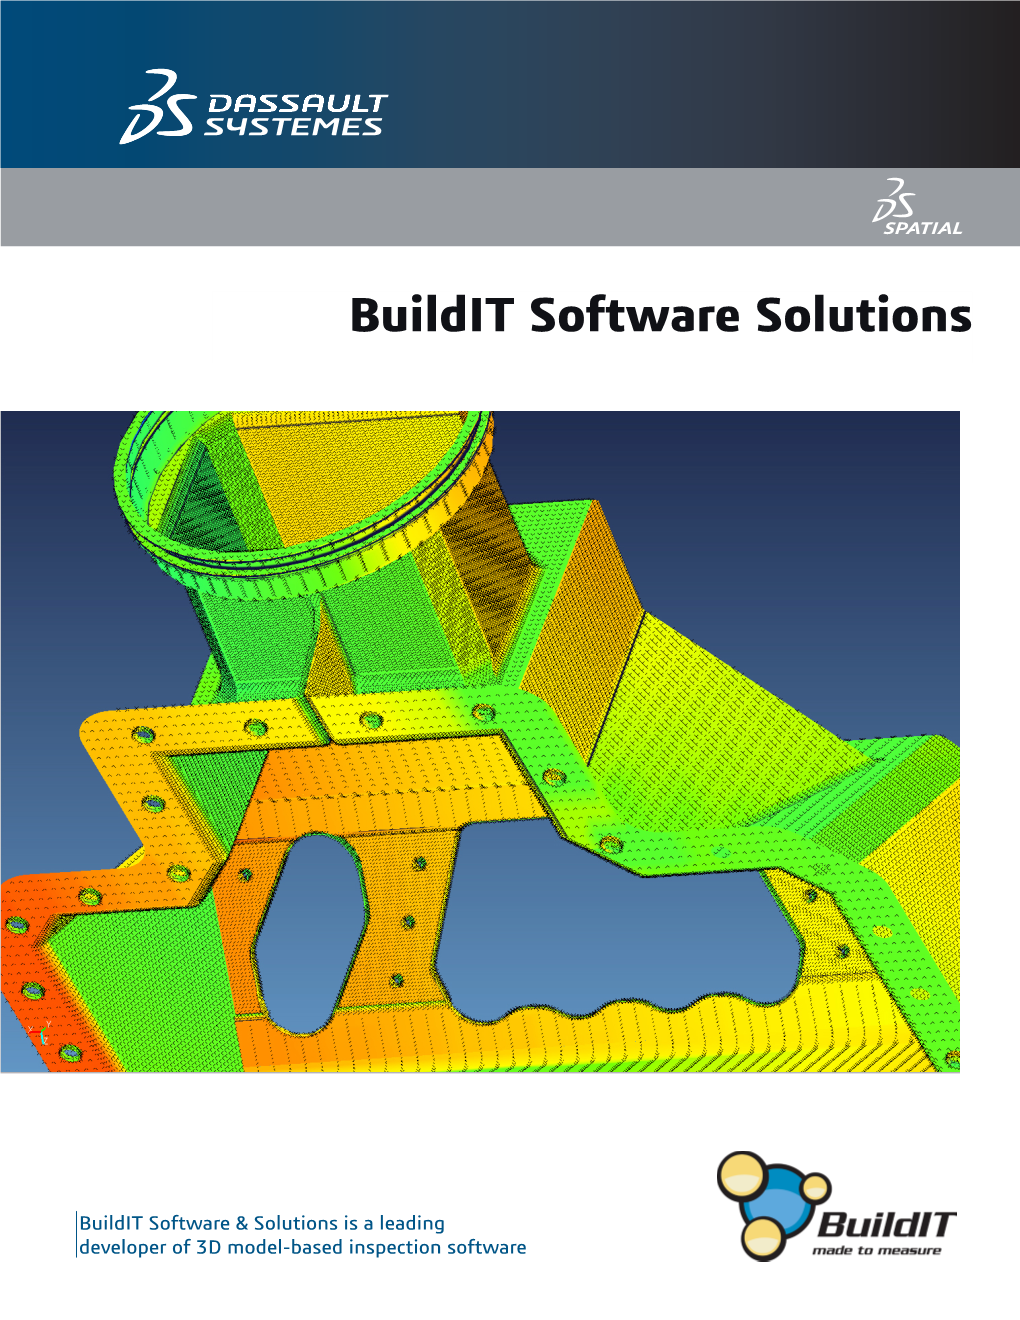 Buildit Software Solutions